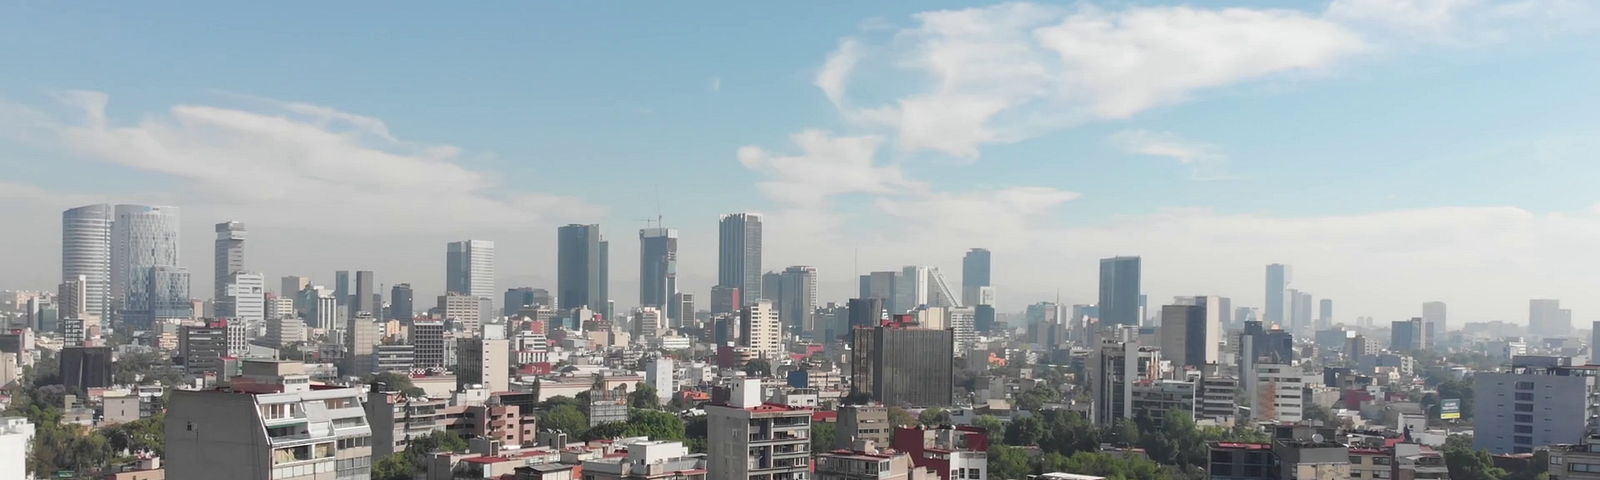 Aerial view of the Skyline in Mexico City, flying over Parque México